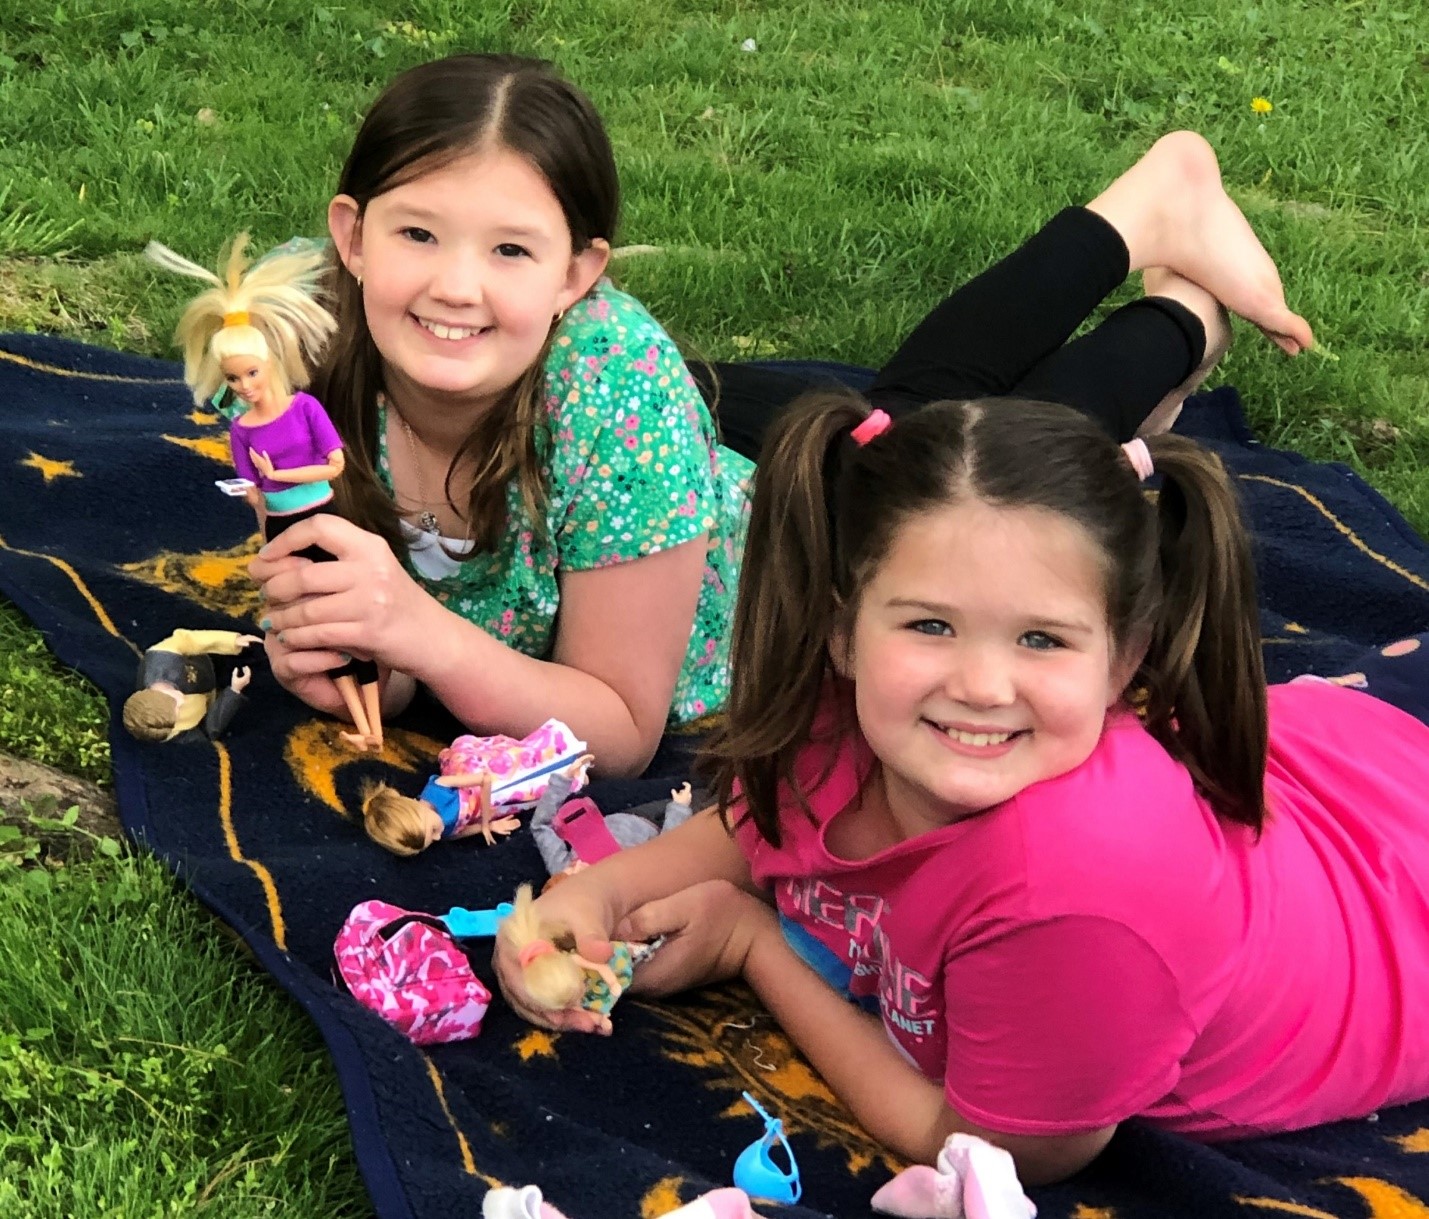 Morgan and sister Natalie playing with dolls in the grass